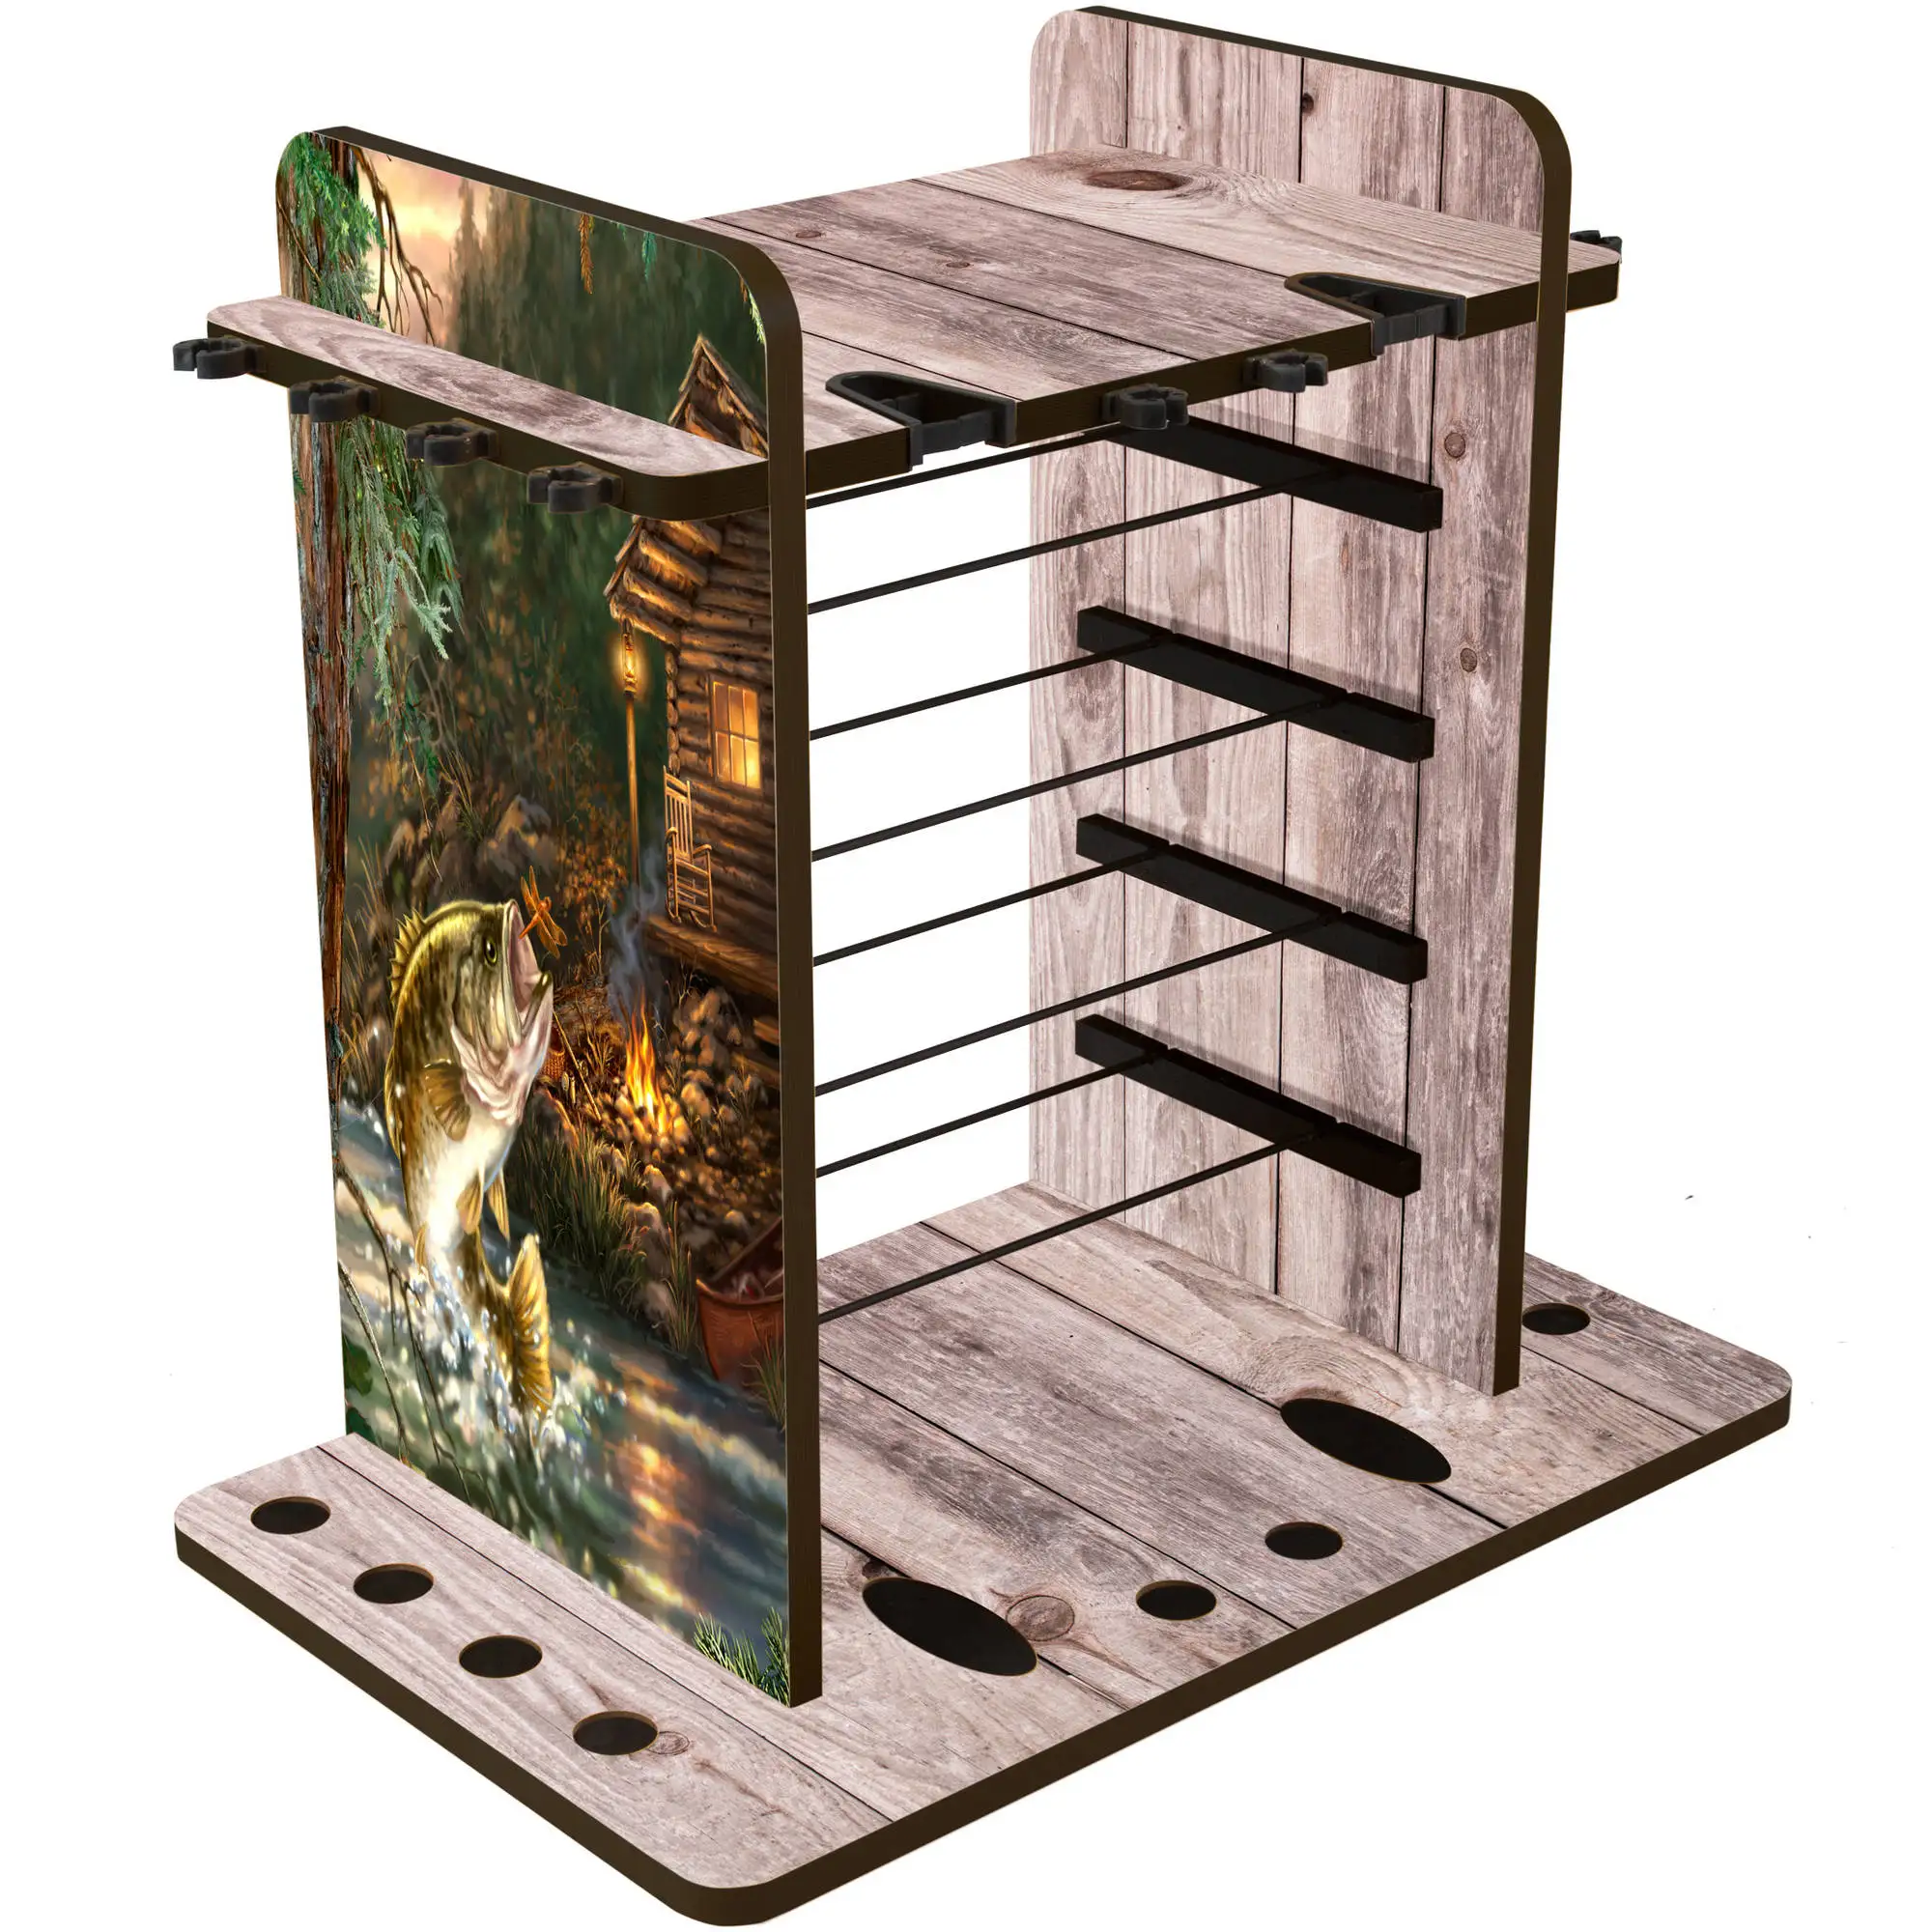 Creek Creations 14 Fishing Rod Rack with 4 Utility Box Storage Capacity & Dual Rod Clips - Features a Sleek Design & Wire Rackin enlarge